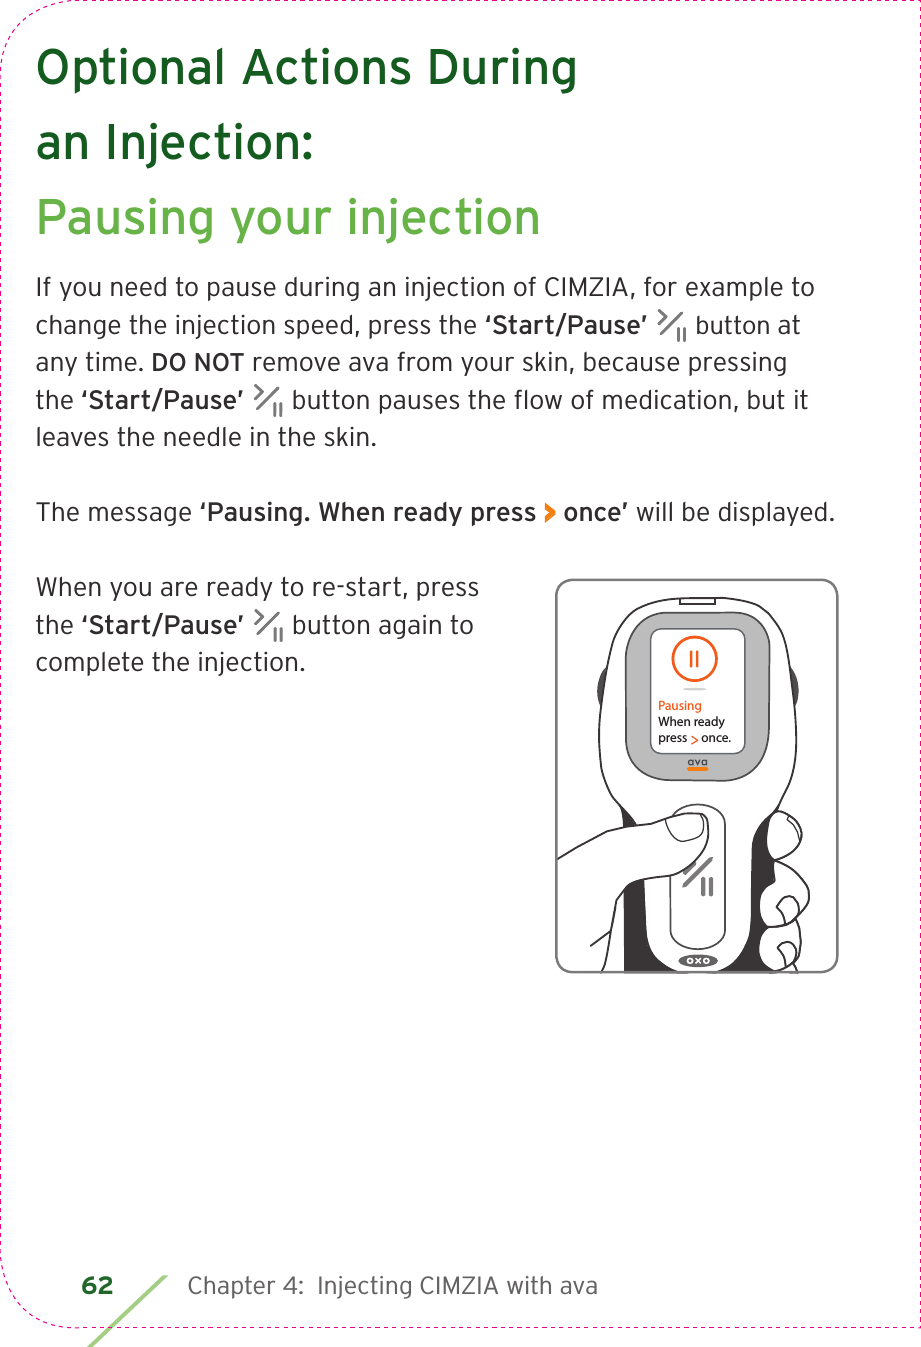 62 Chapter 4:  Injecting CIMZIA with avaOptional Actions During an Injection: Pausing your injectionIf you need to pause during an injection of CIMZIA, for example to change the injection speed, press the ‘Start/Pause’  button at any time. DO NOT remove ava from your skin, because pressing the ‘Start/Pause’  button pauses the ﬂow of medication, but it leaves the needle in the skin.The message ‘Pausing. When ready press &gt; once’ will be displayed.When you are ready to re-start, press the ‘Start/Pause’  button again to complete the injection.PausingWhen readypress     once.